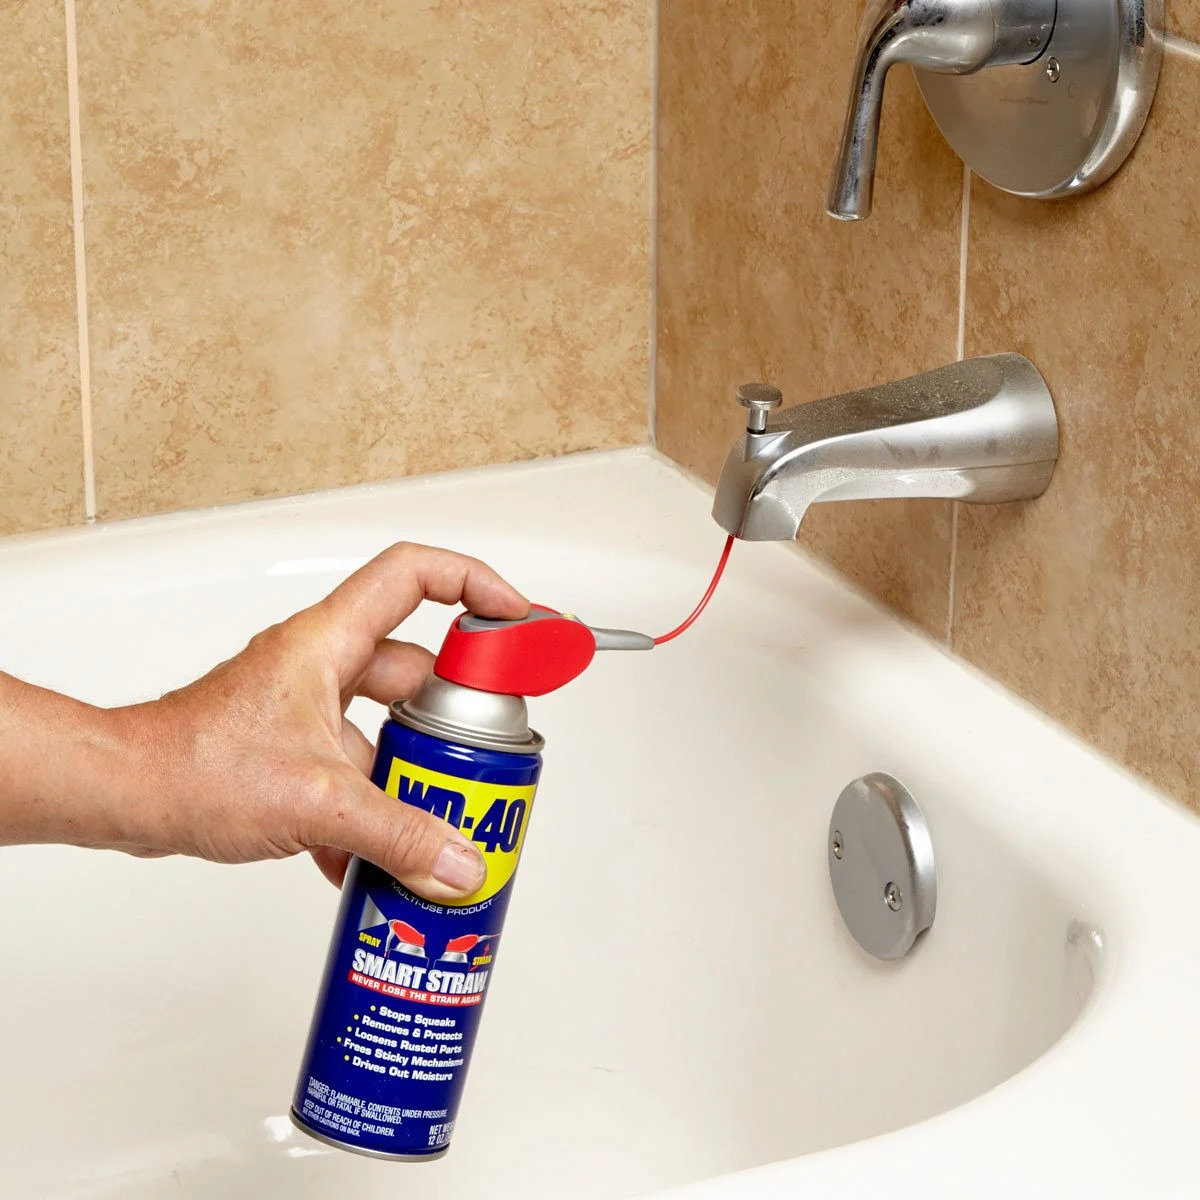 Why Spray WD40 Up Your Faucet